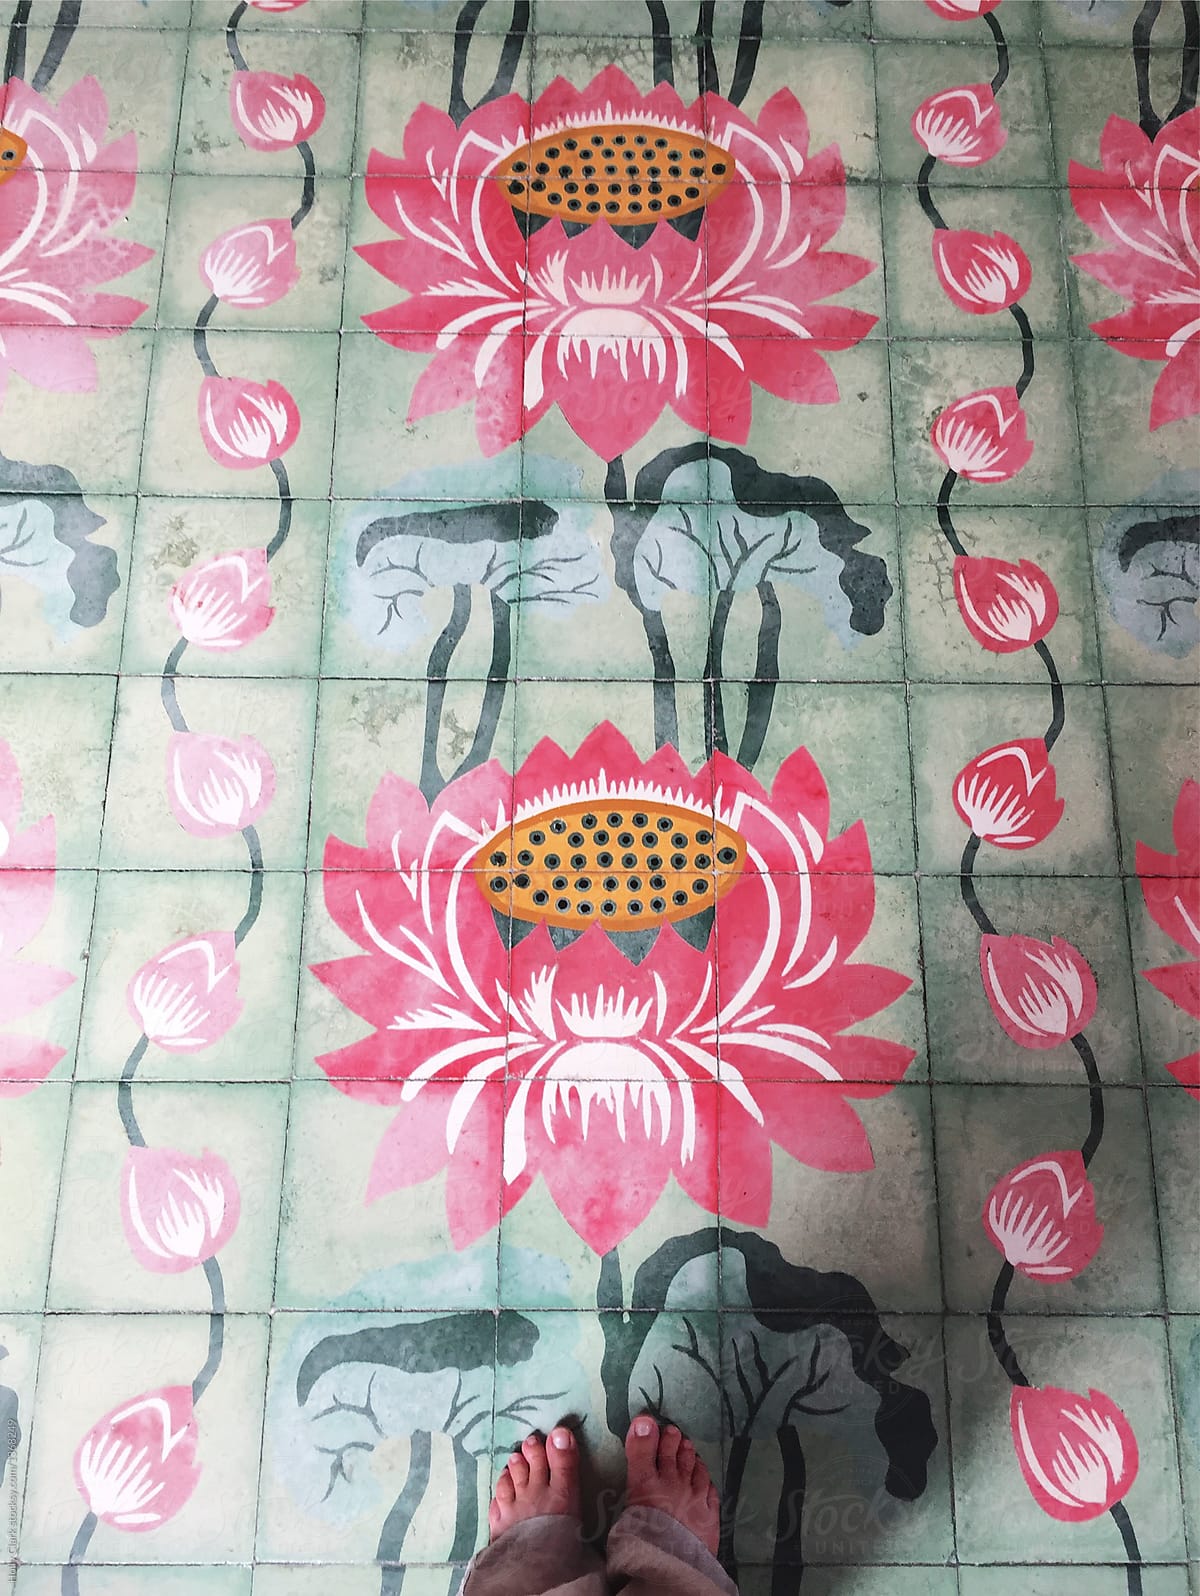 Bare Feet On Beautiful Pink And Green Lotus Tiles In Temple by Stocksy  Contributor Holly Clark - Stocksy